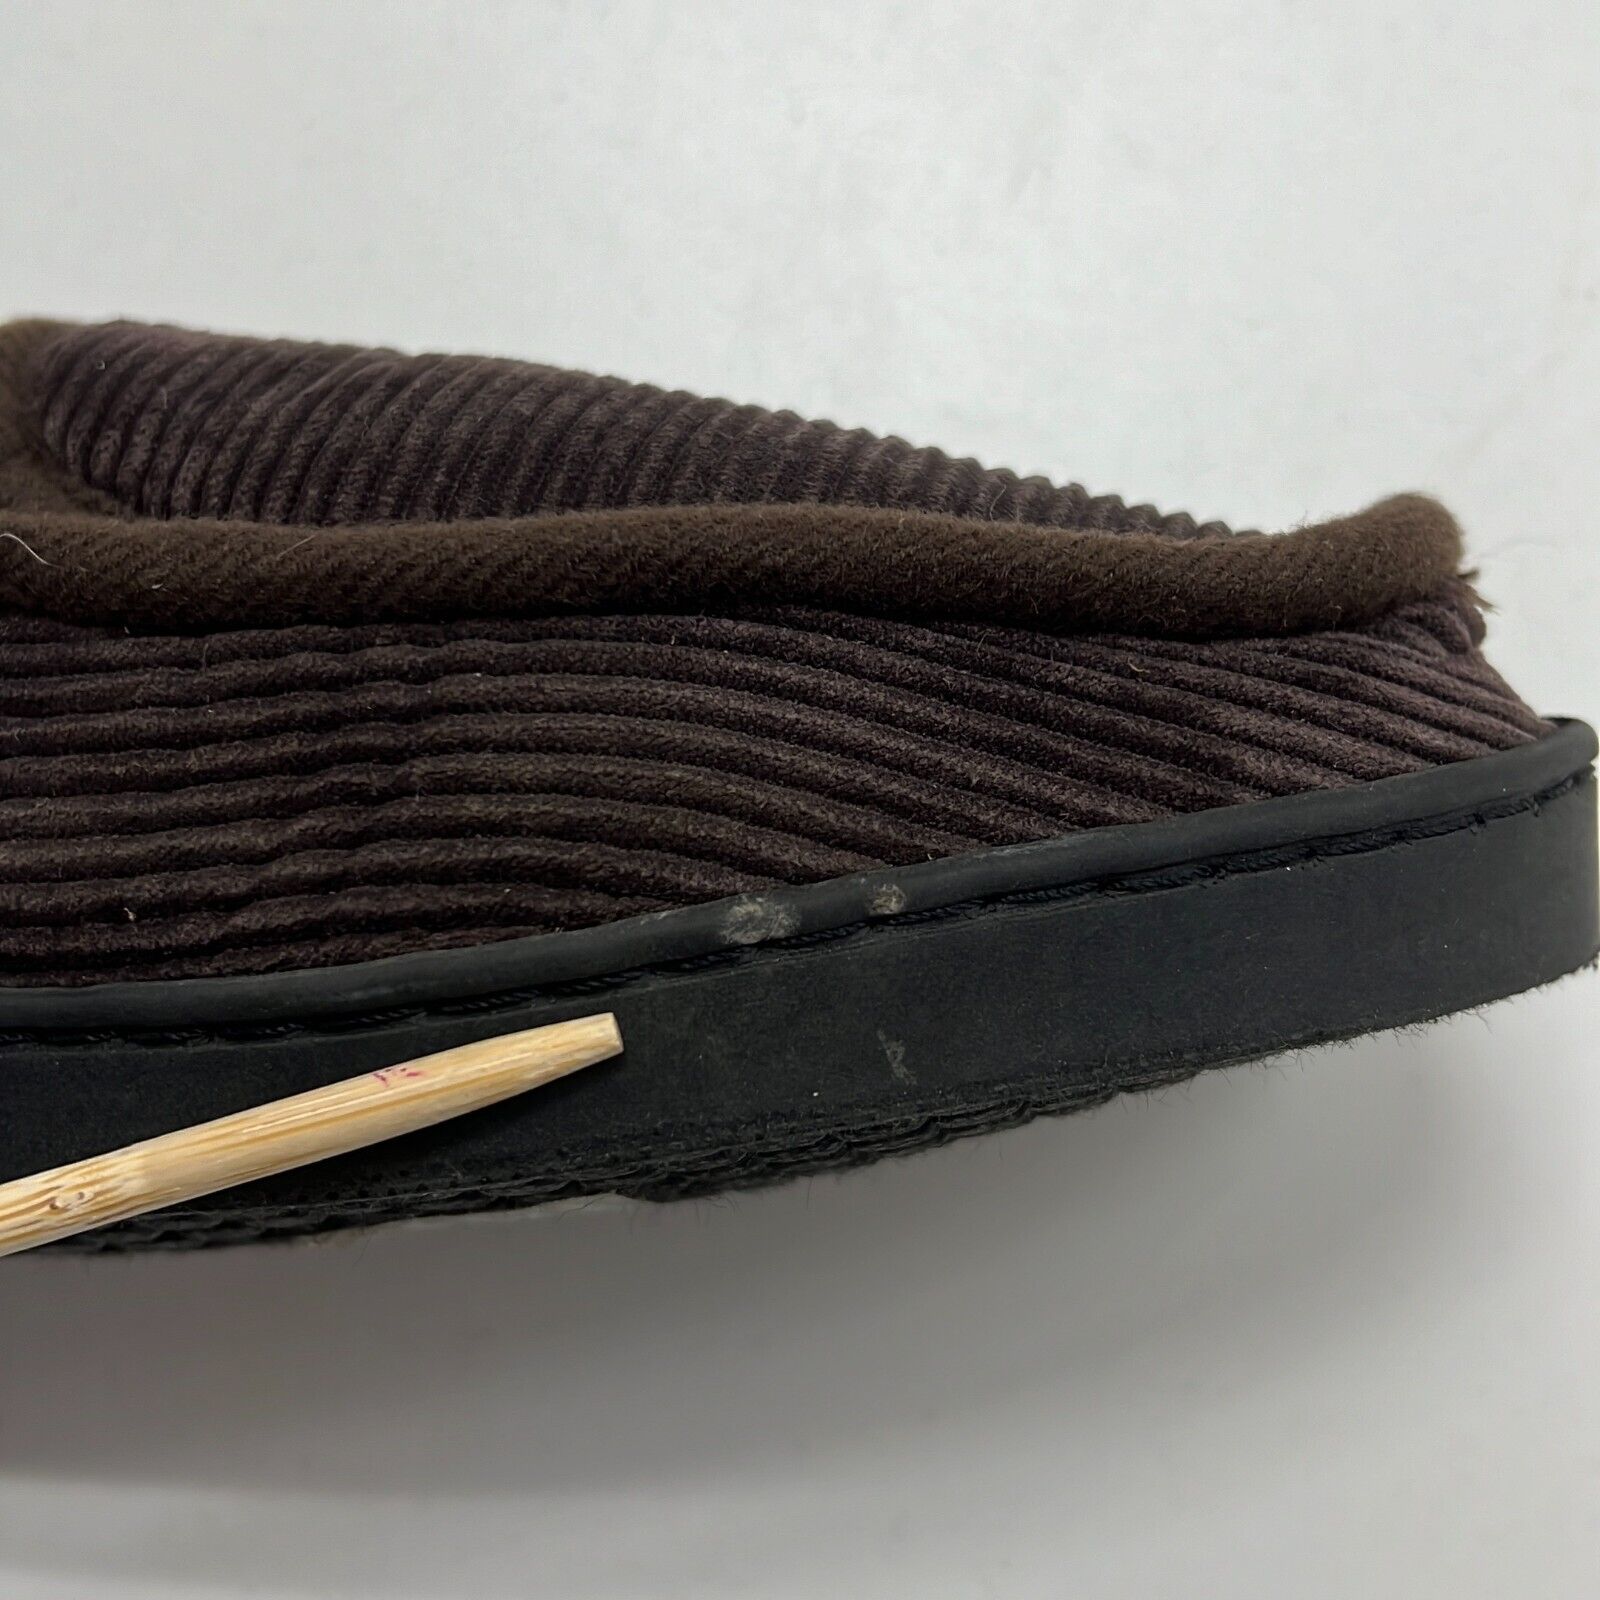 King Size Men's Brown Round Toe Corduroy Moccasin Slippers Size 9 EW NWOT